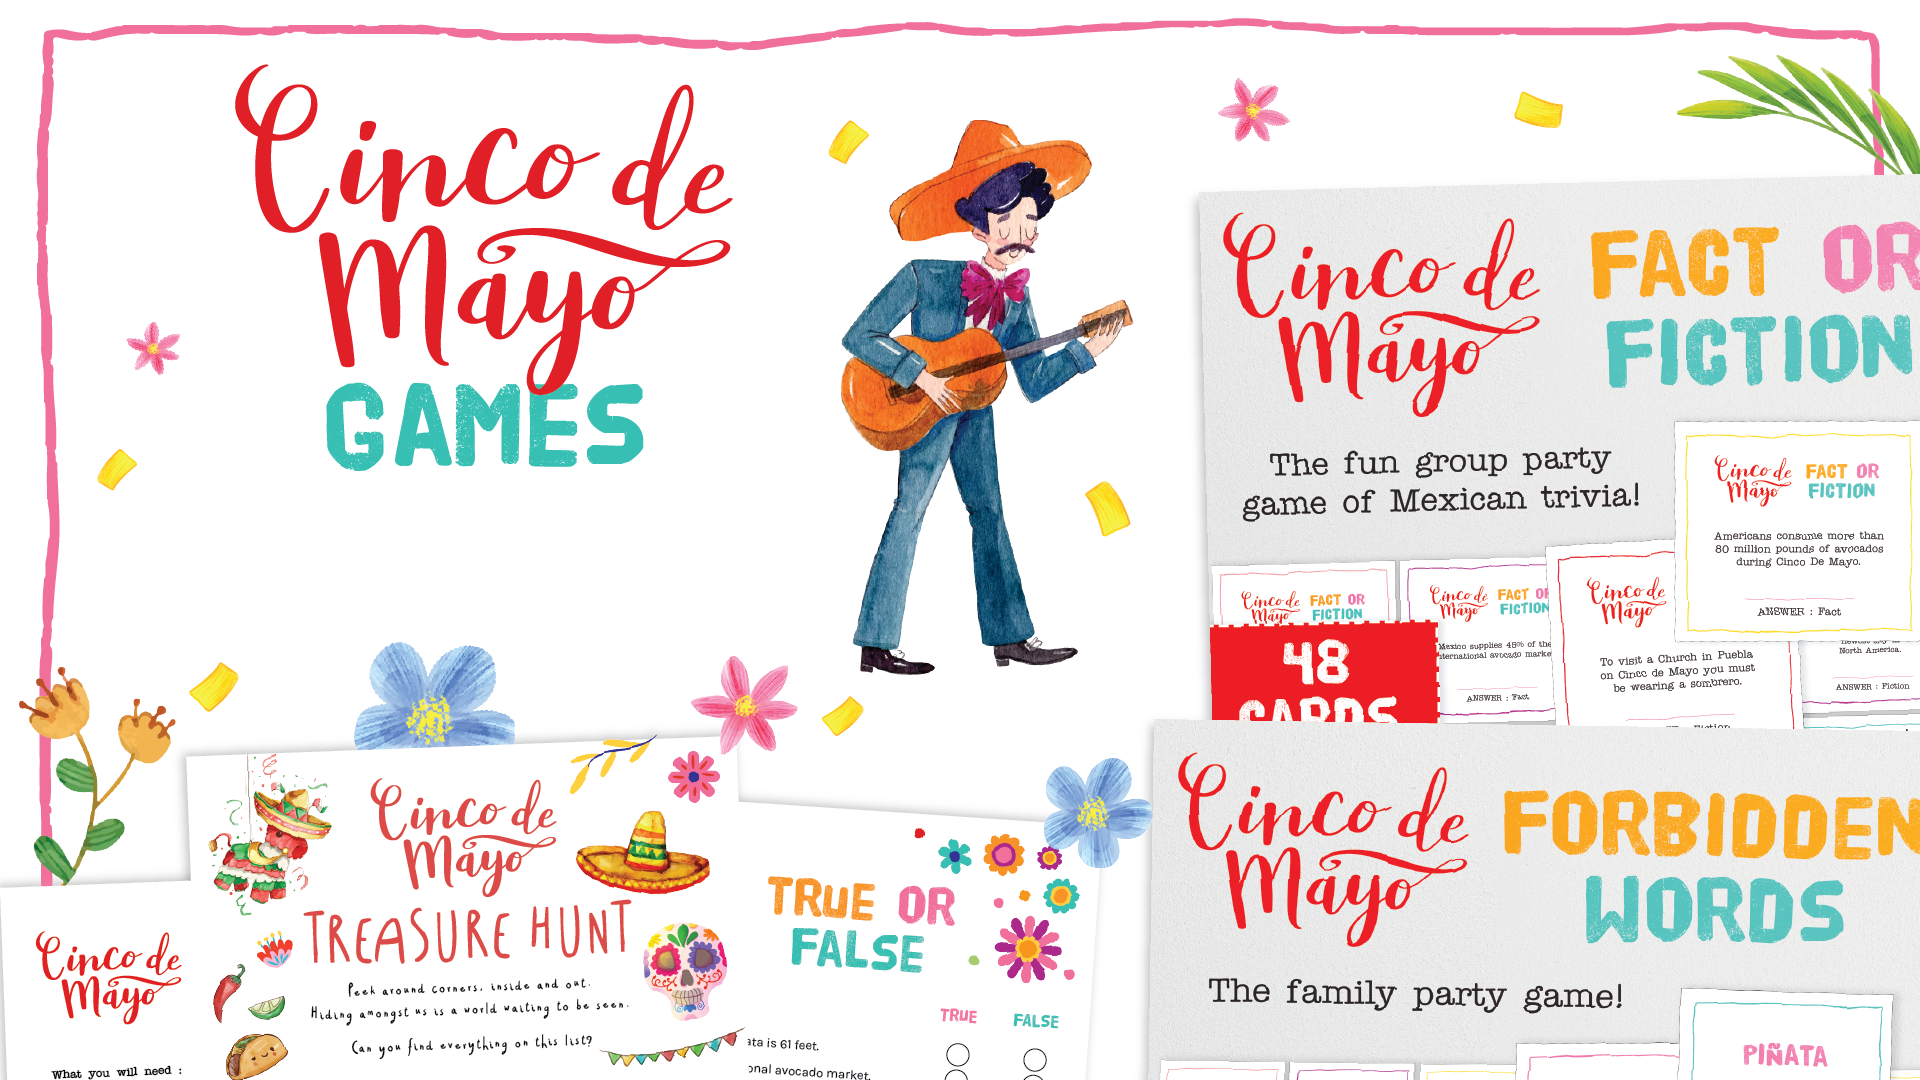 This Cinco de Mayo celebrate as a family and play some good old fashioned games! From trivia to word and party game these games will entertain all the family from young to old this season.